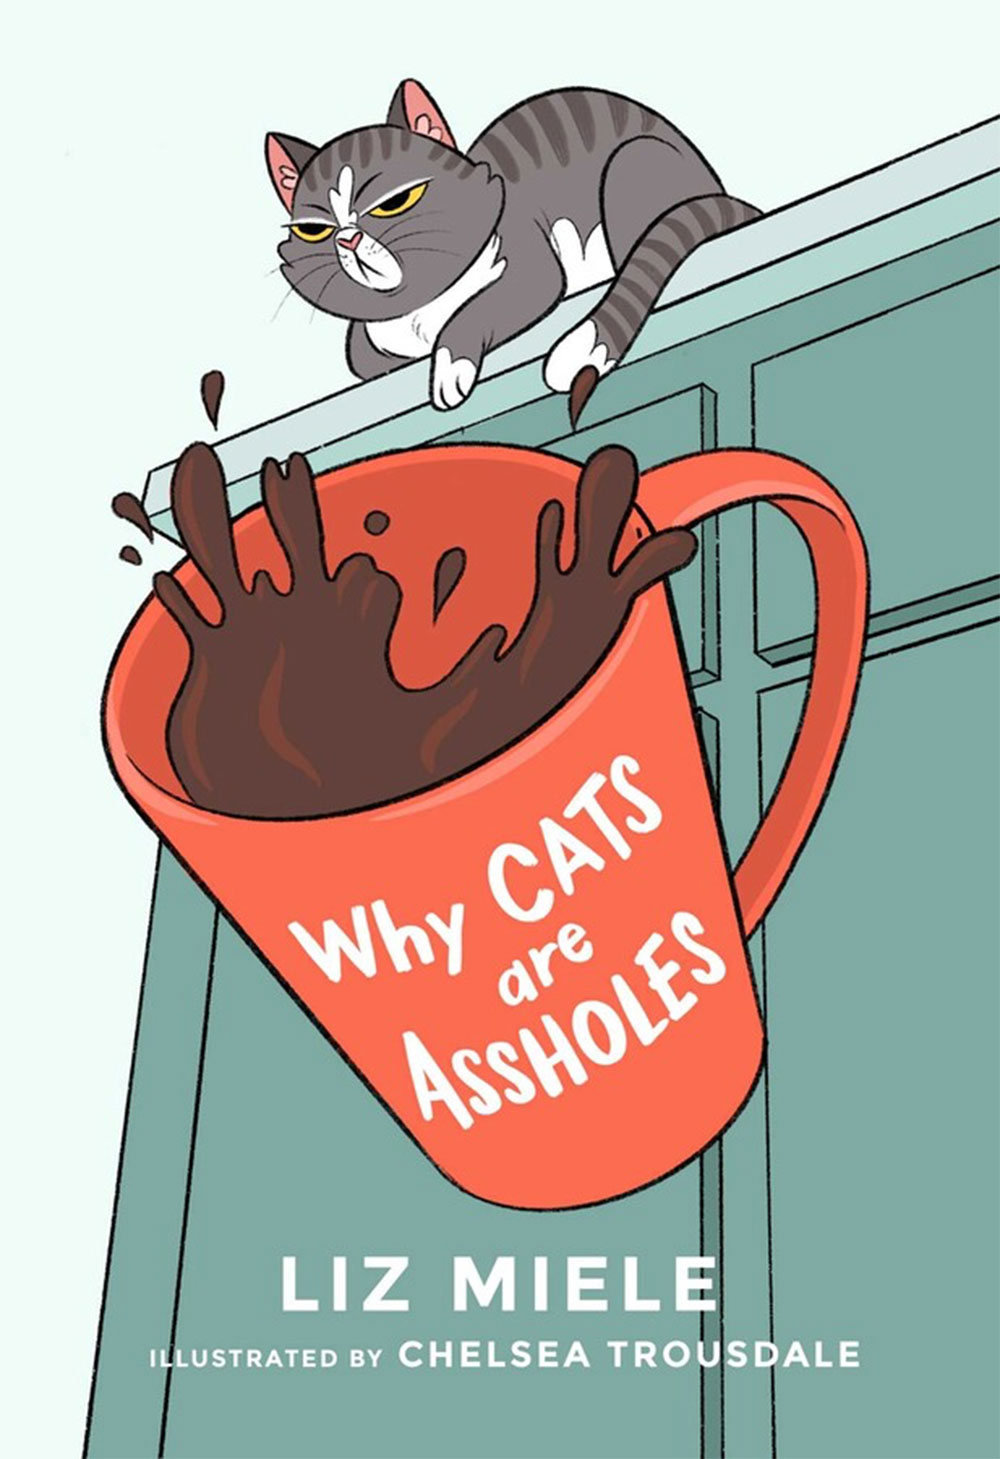 Liz Miele - Why Cats are Assholes